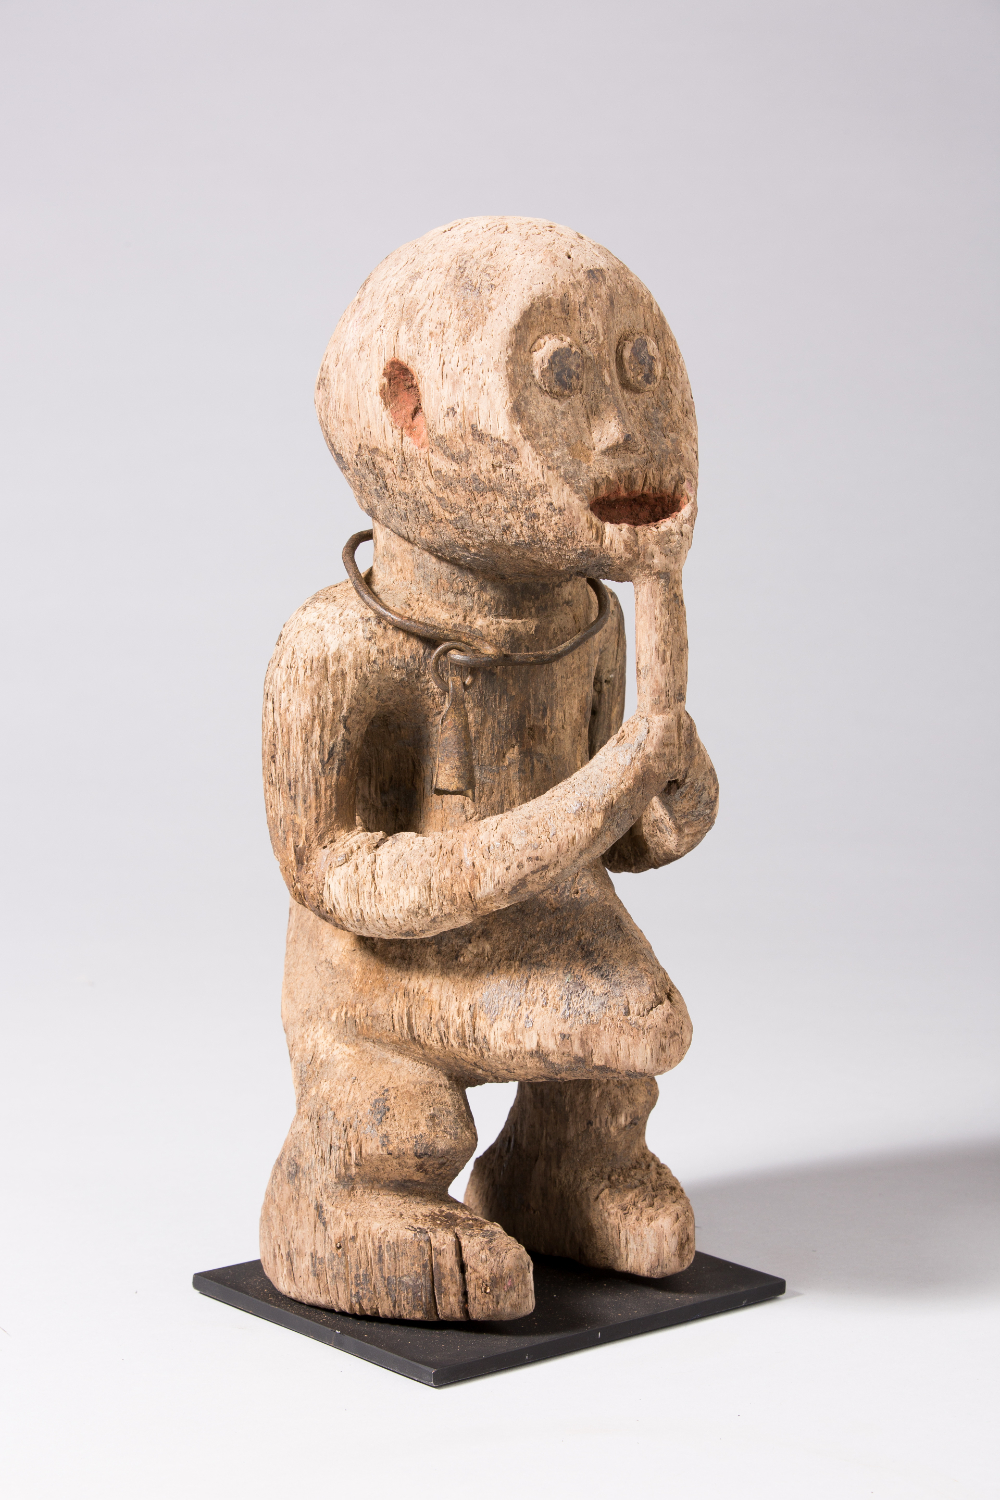 thumbnail of Female Figure from Northern Grassfields: Mambila. medium: Wood, metal, pigment. date: early 20th century